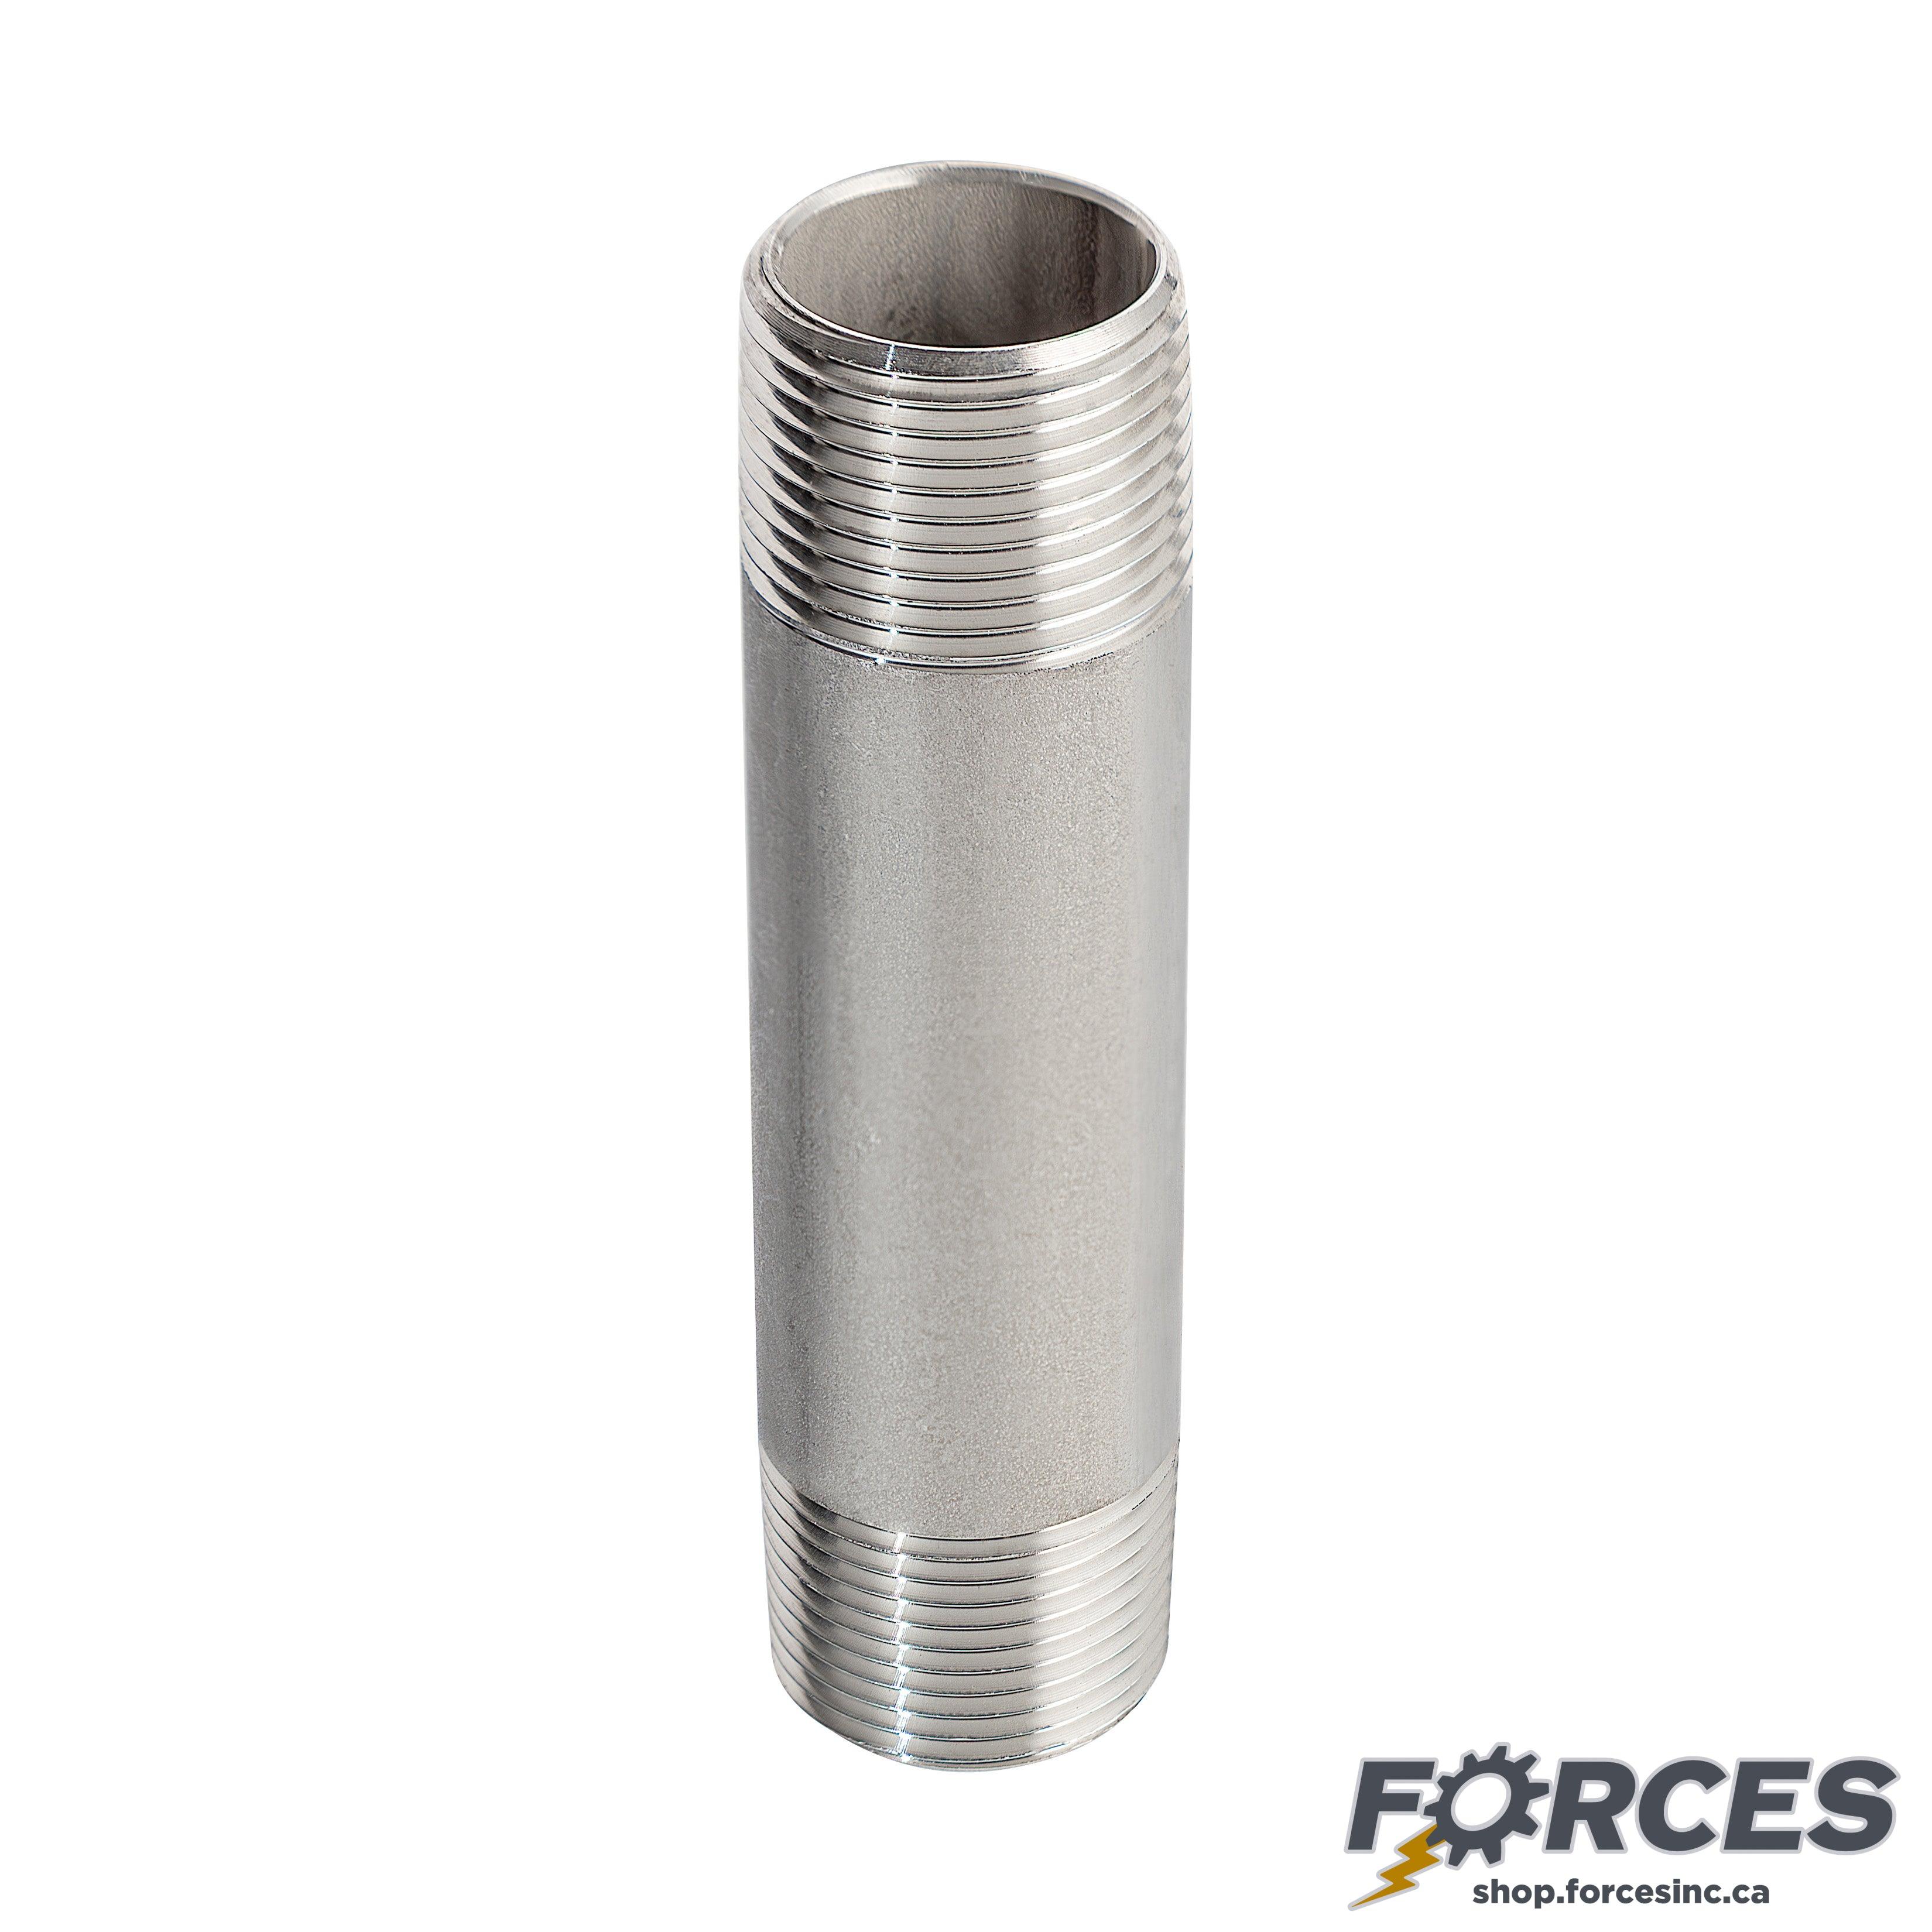 1-1/2" X 4" Long Nipple - Stainless Steel 316 - Forces Inc